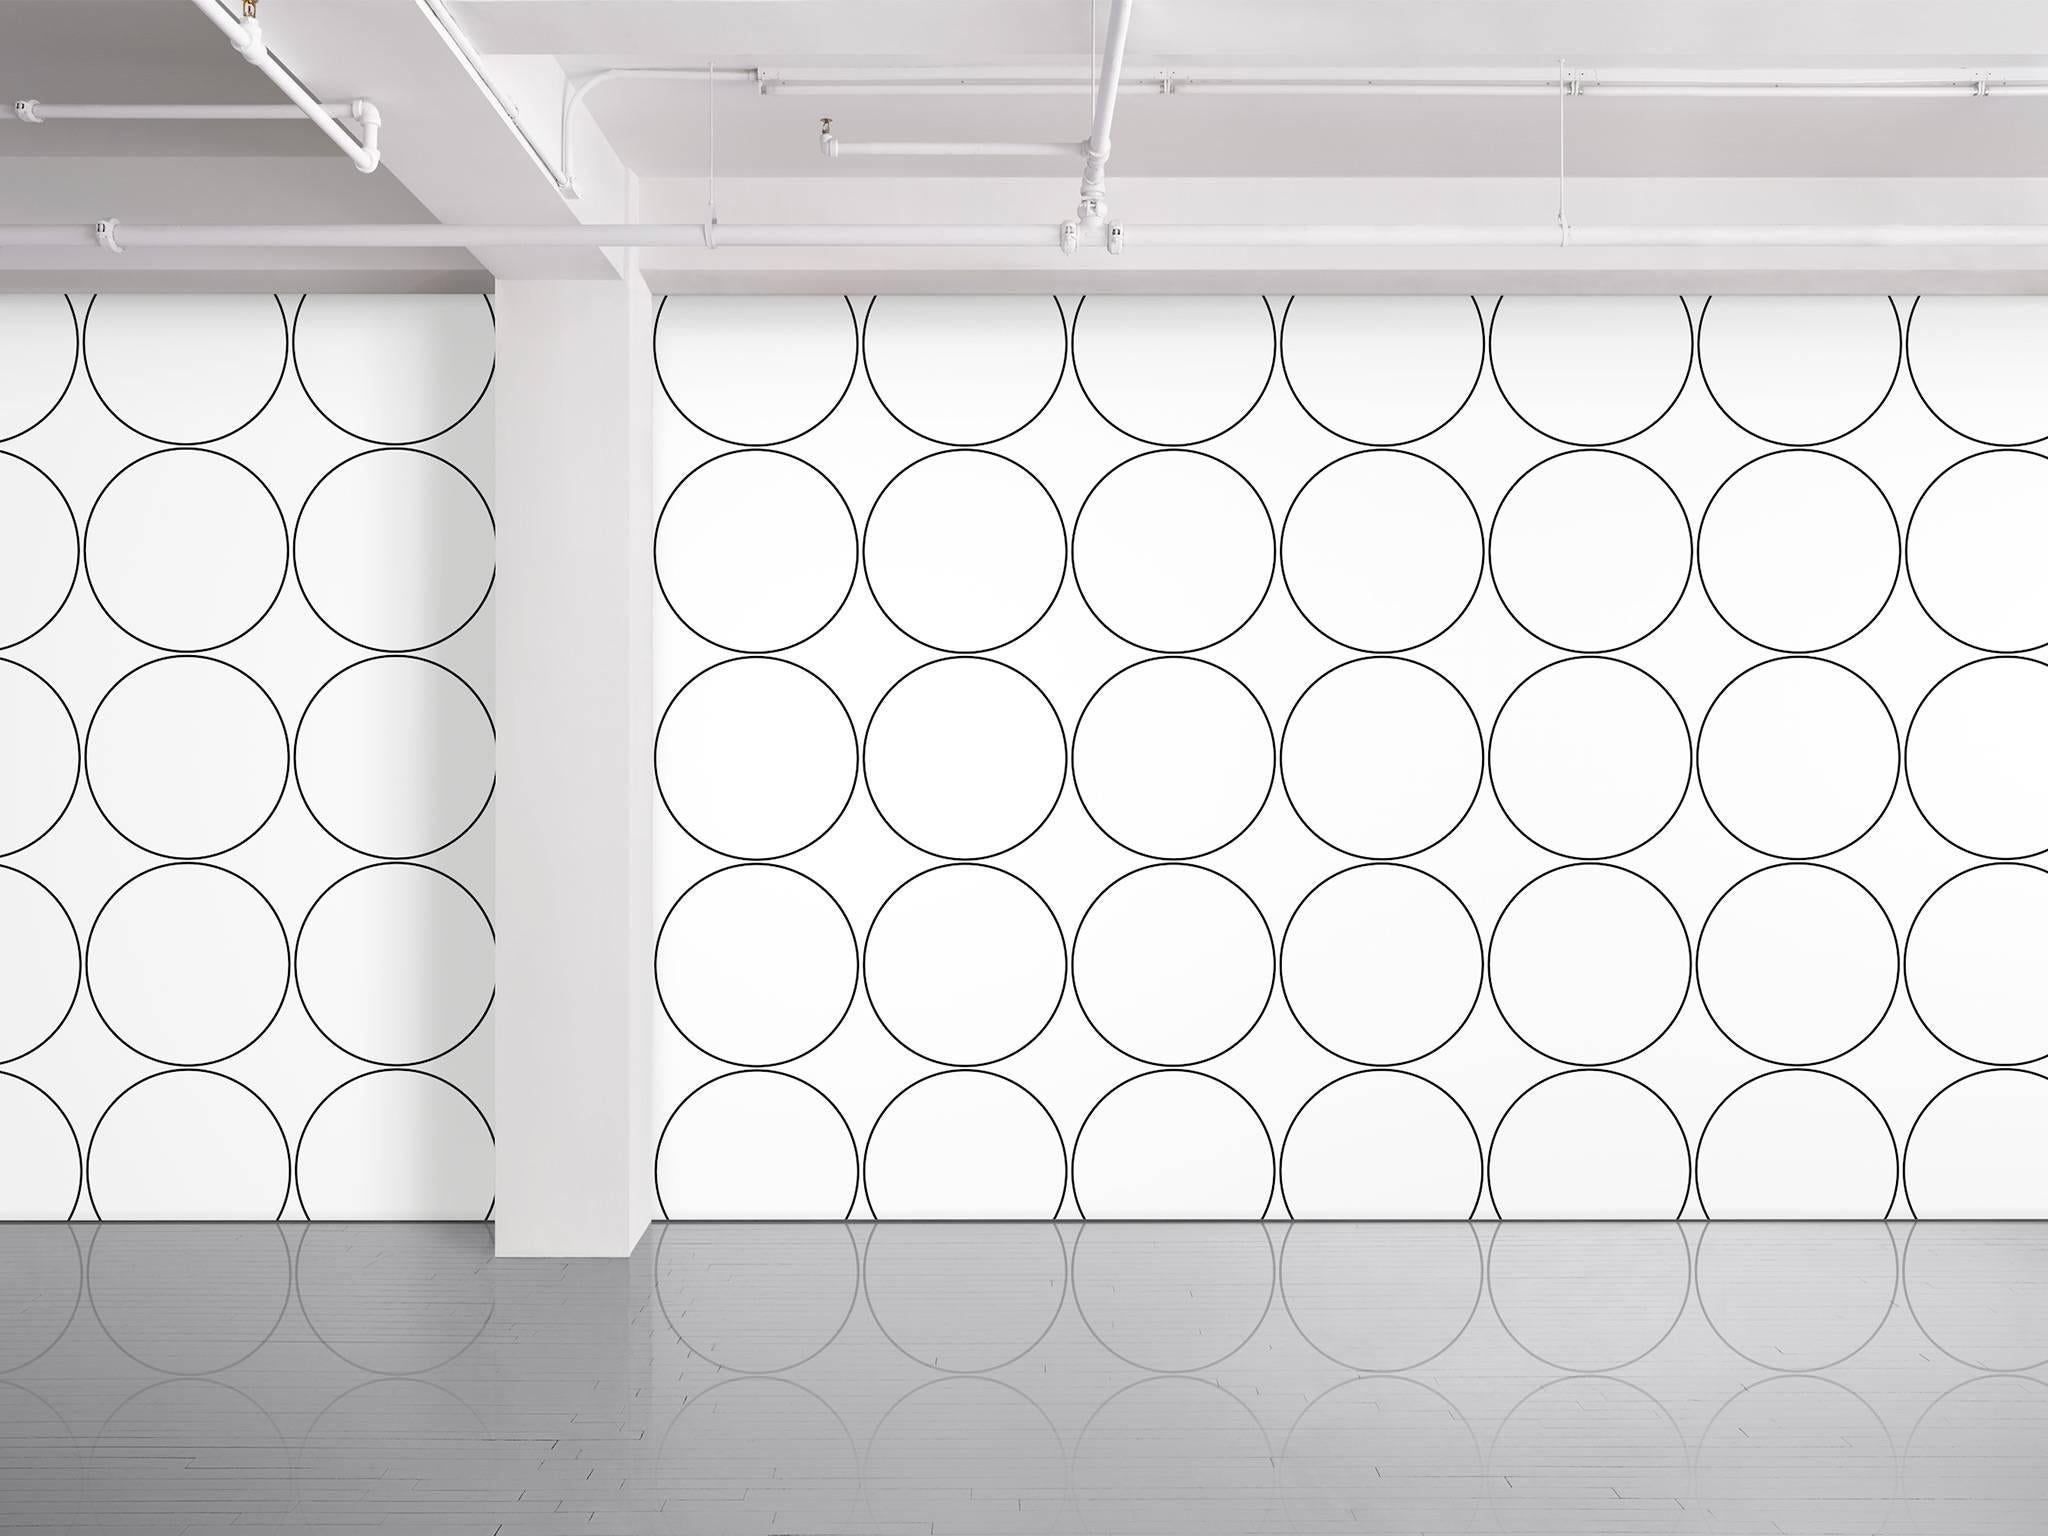 Maharam Serpentine Galleries wallpaper
Circle Cutter's Room by Rosemarie Trockel 
001 White 

Rosemarie Trockel is a conceptual artist based in Cologne whose work in textiles, sculpture, collage, and video examine feminine modes of production.